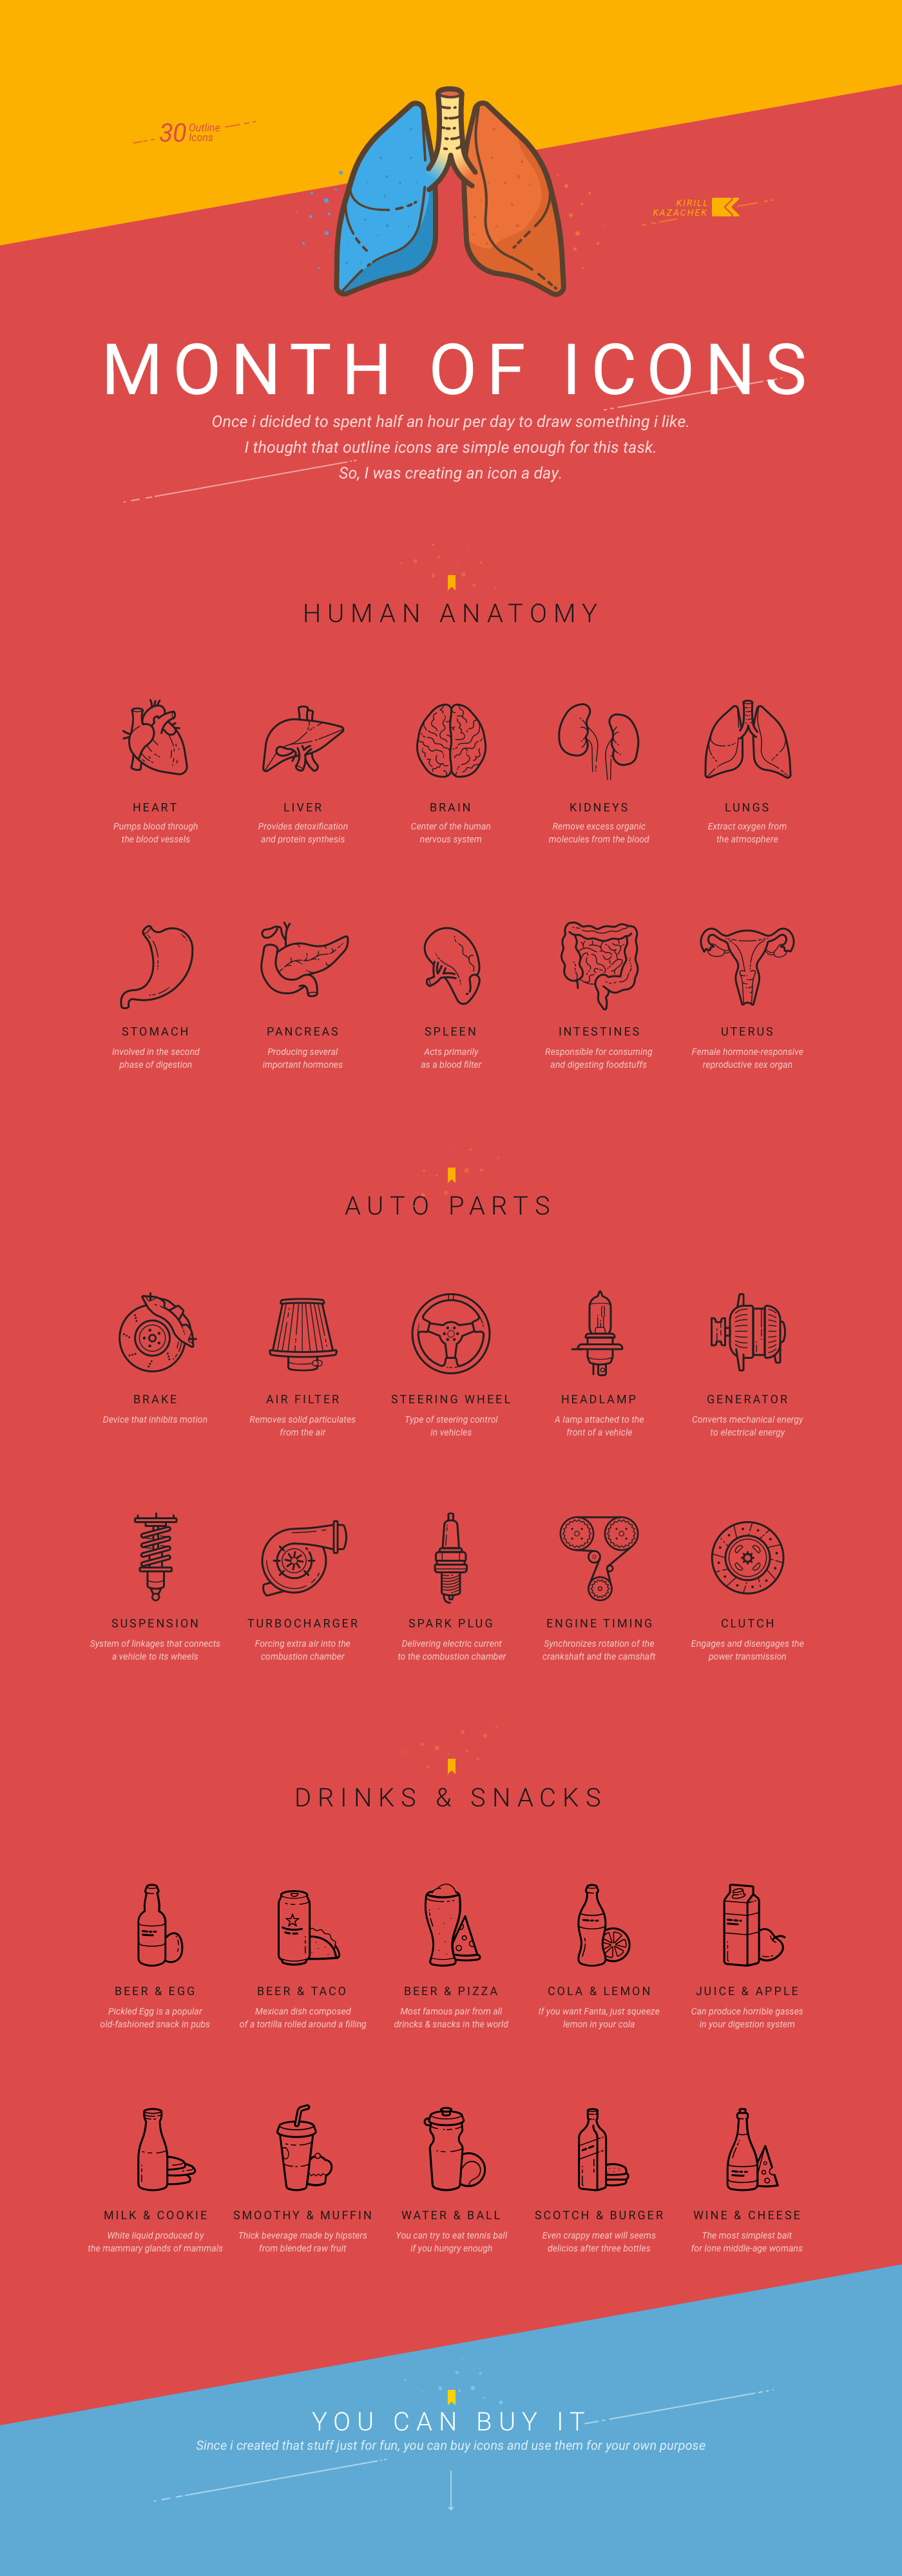 icons outline human anatomy Auto Parts Drinks And Snacks